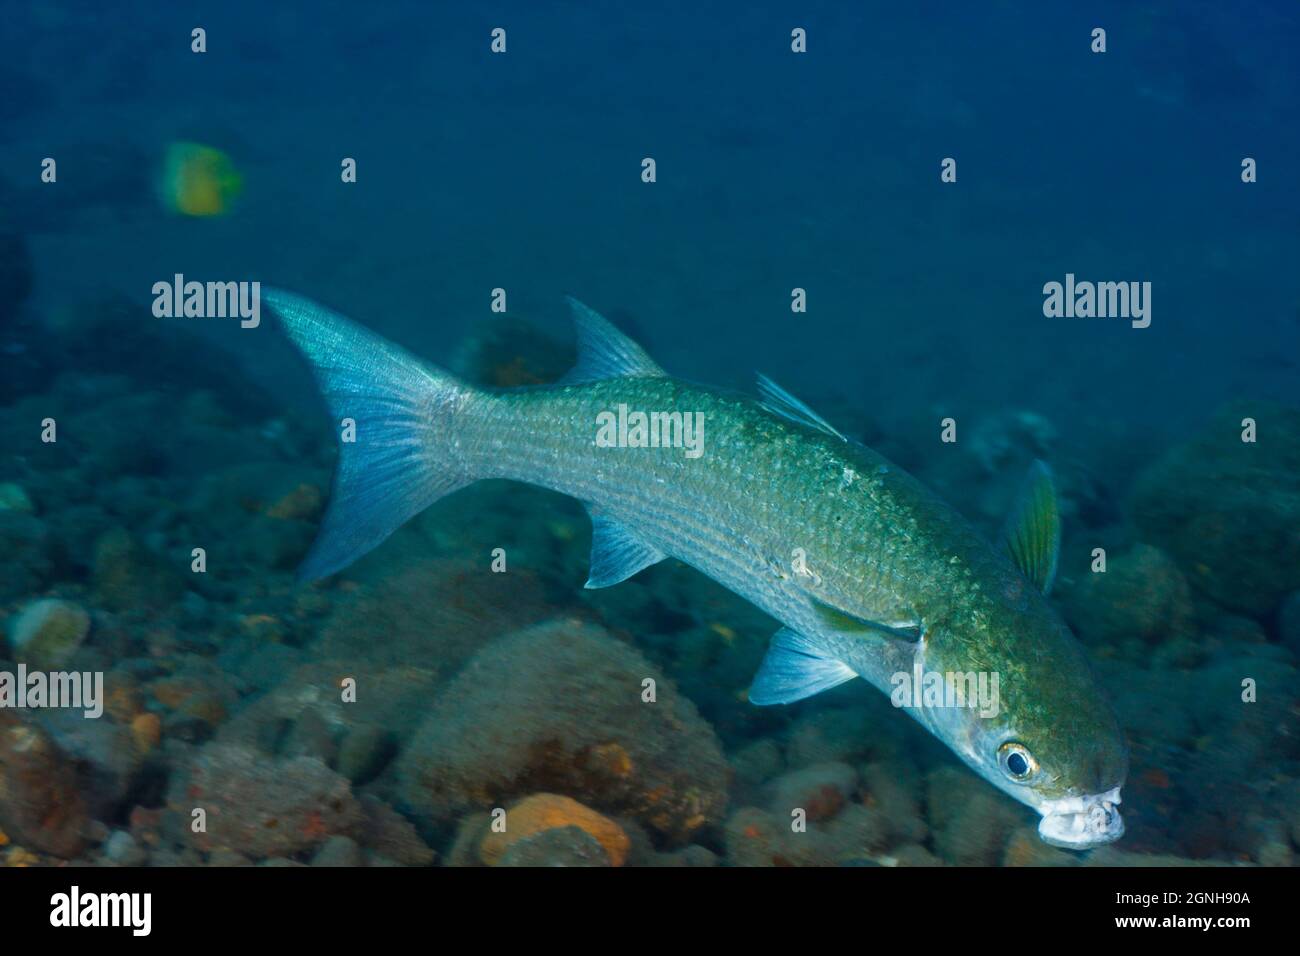 Fringelip mullet, Crenimugil crenilabis, are found in coastal waters, over sandy or muddy areas of lagoons, reef flats and tide pools, Bali, Indonesia Stock Photo